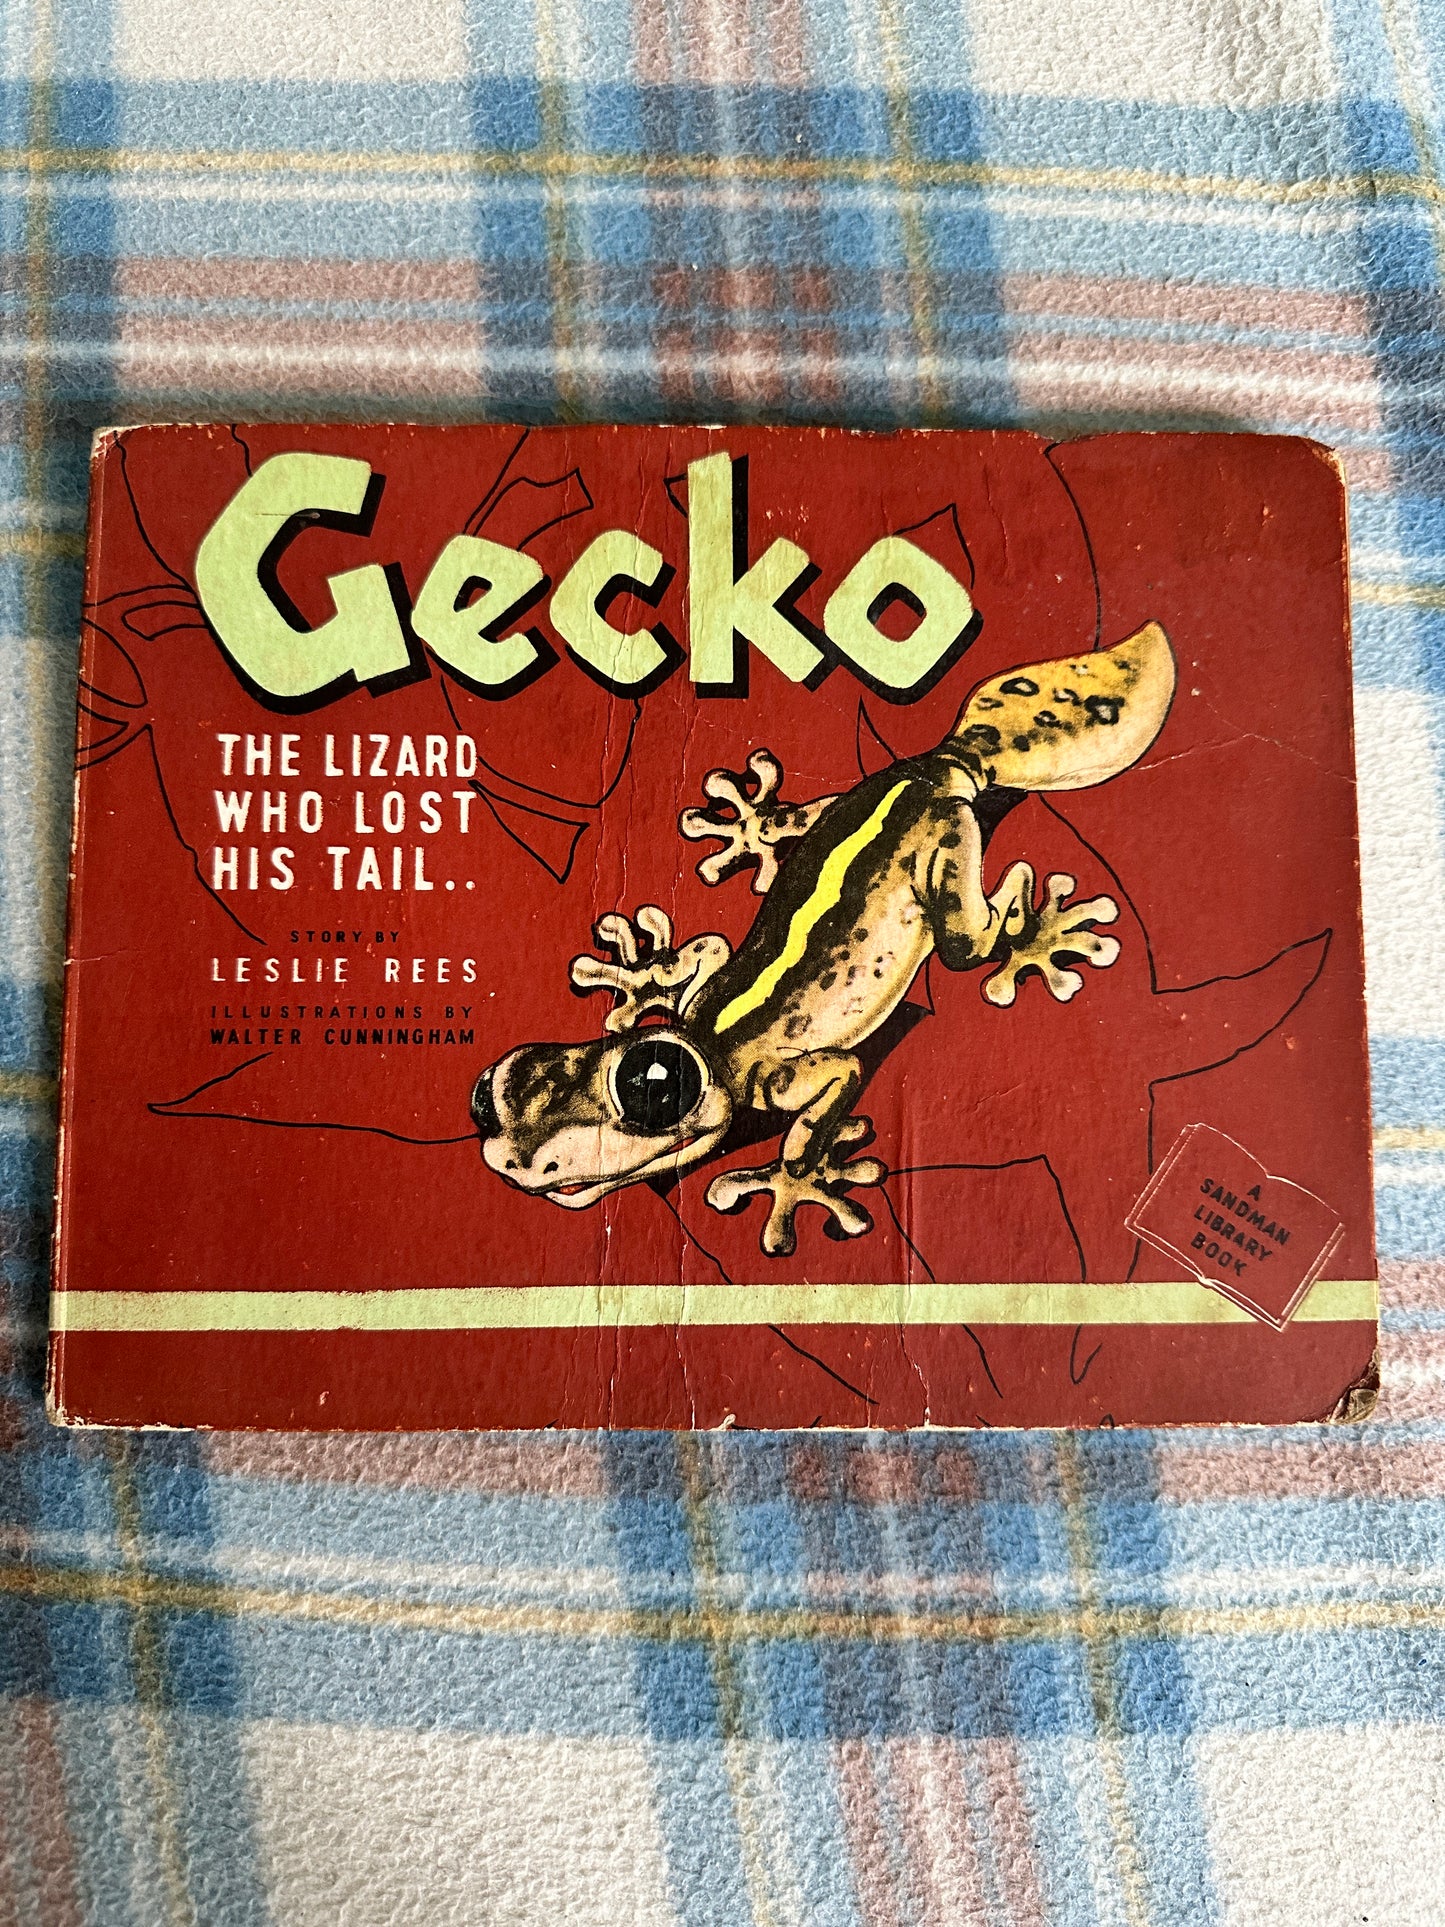 1943*1st* Gecko The Lizard Who Lost His Tail..- Leslie Rees(Walter Cunningham illustration) John Sands Published